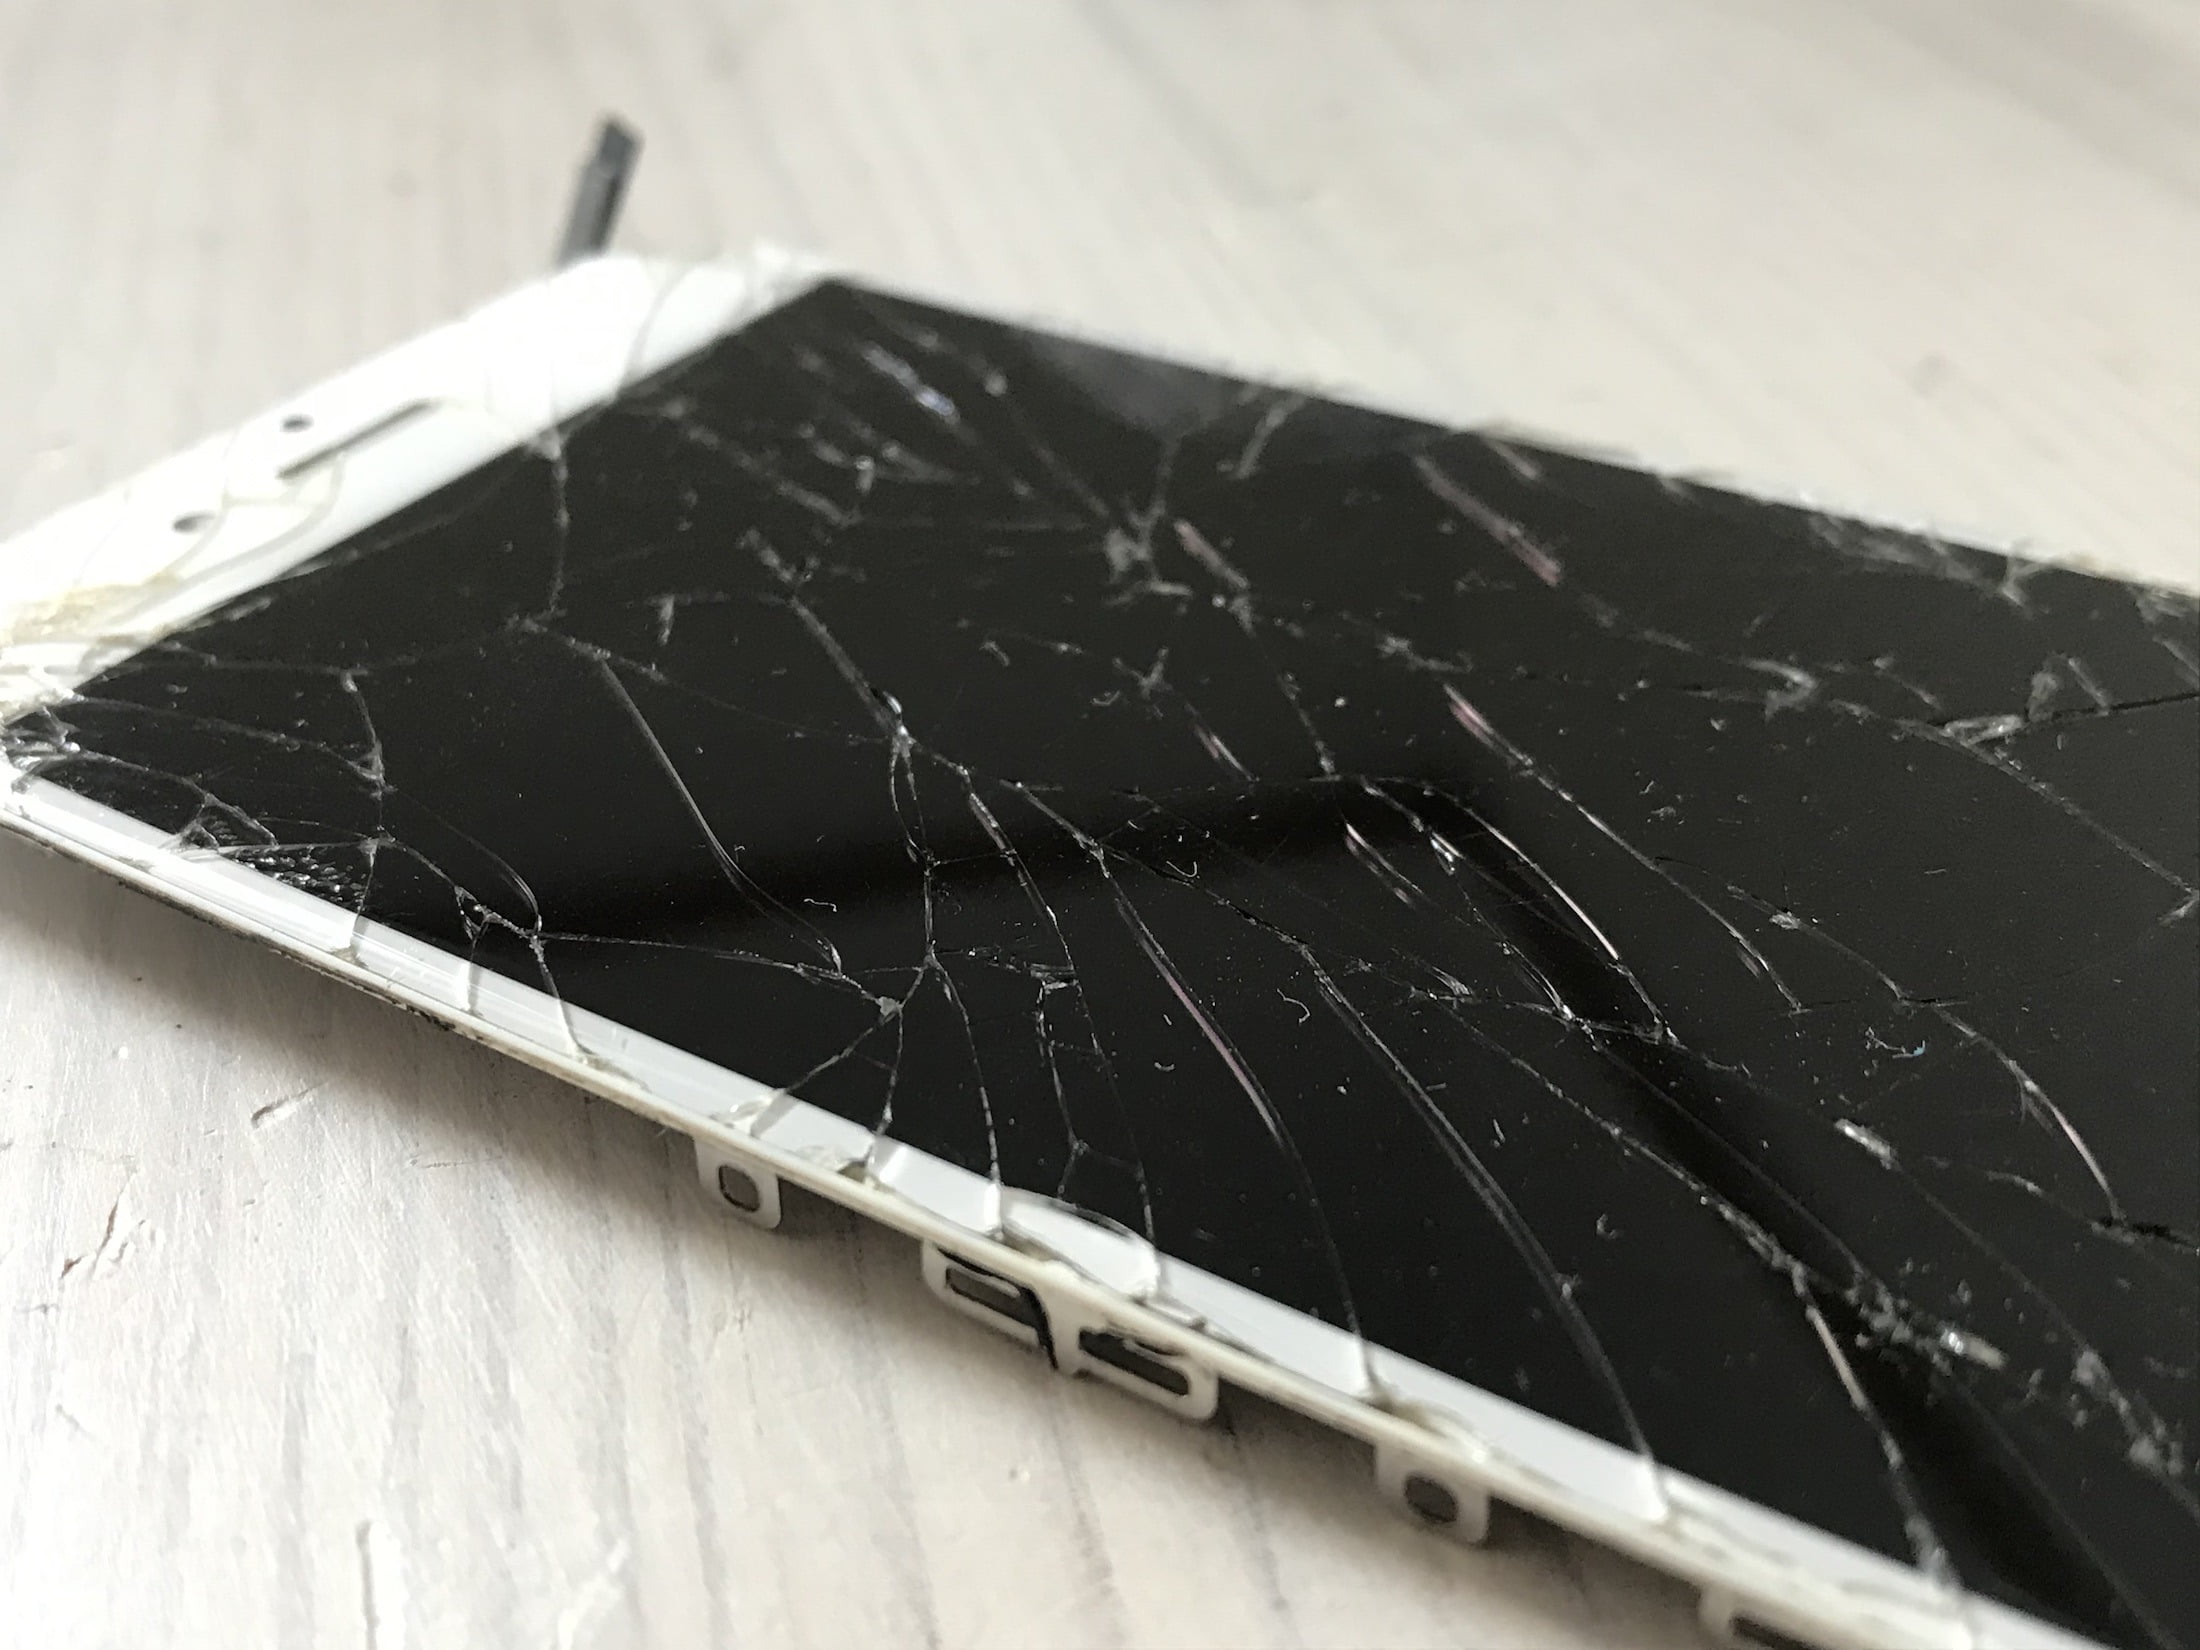 Iphone Display Shattered